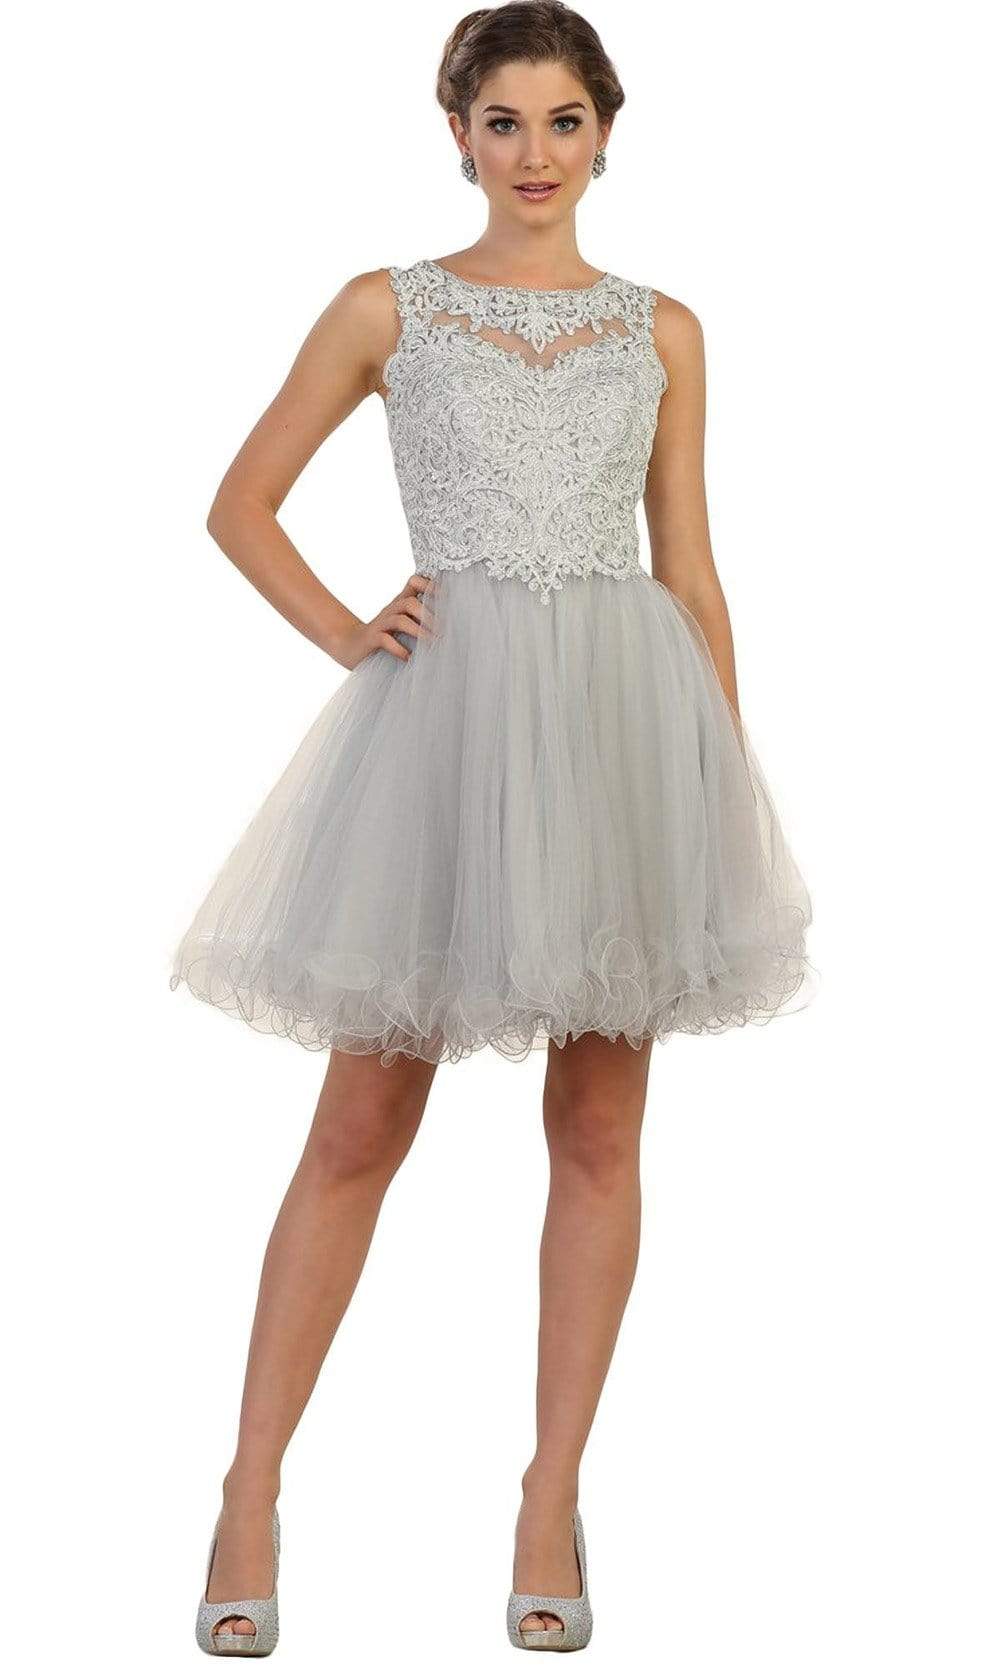 May Queen - Embellished Jewel A-line Homecoming Dress Special Occasion Dress 4 / Silver